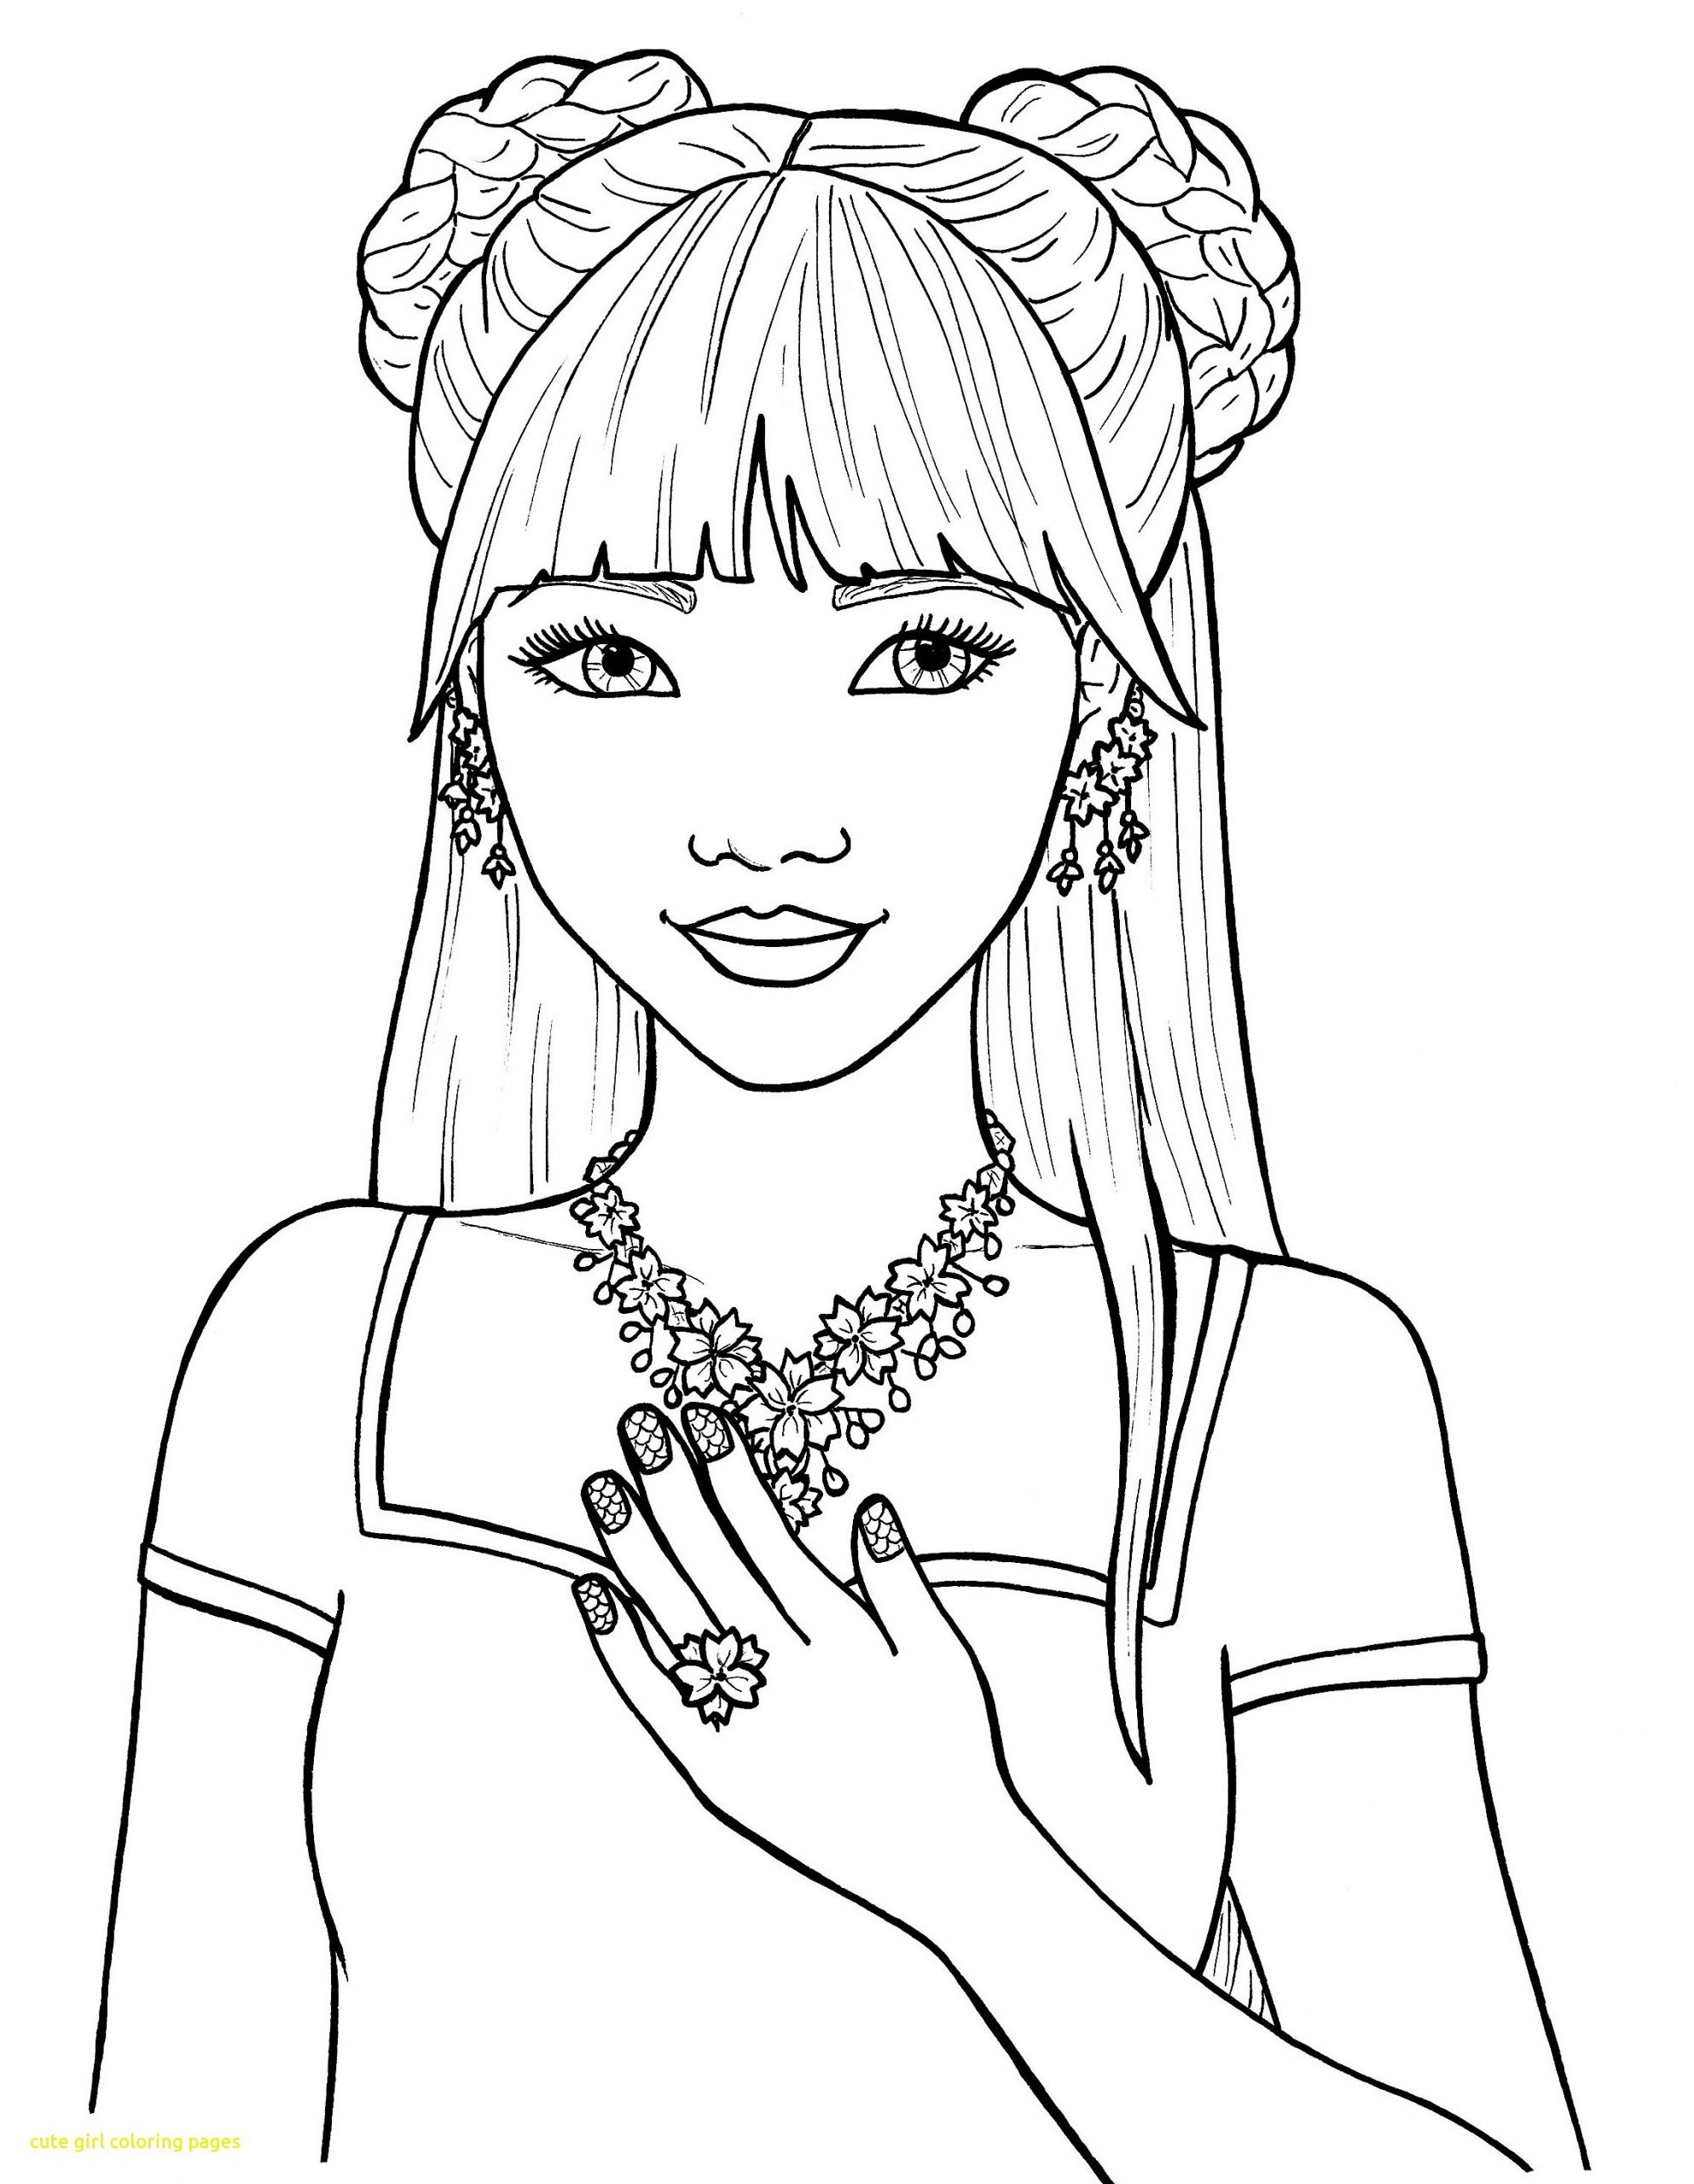 Girl Coloring Pages Printable
 Coloring Pages for Girls Best Coloring Pages For Kids